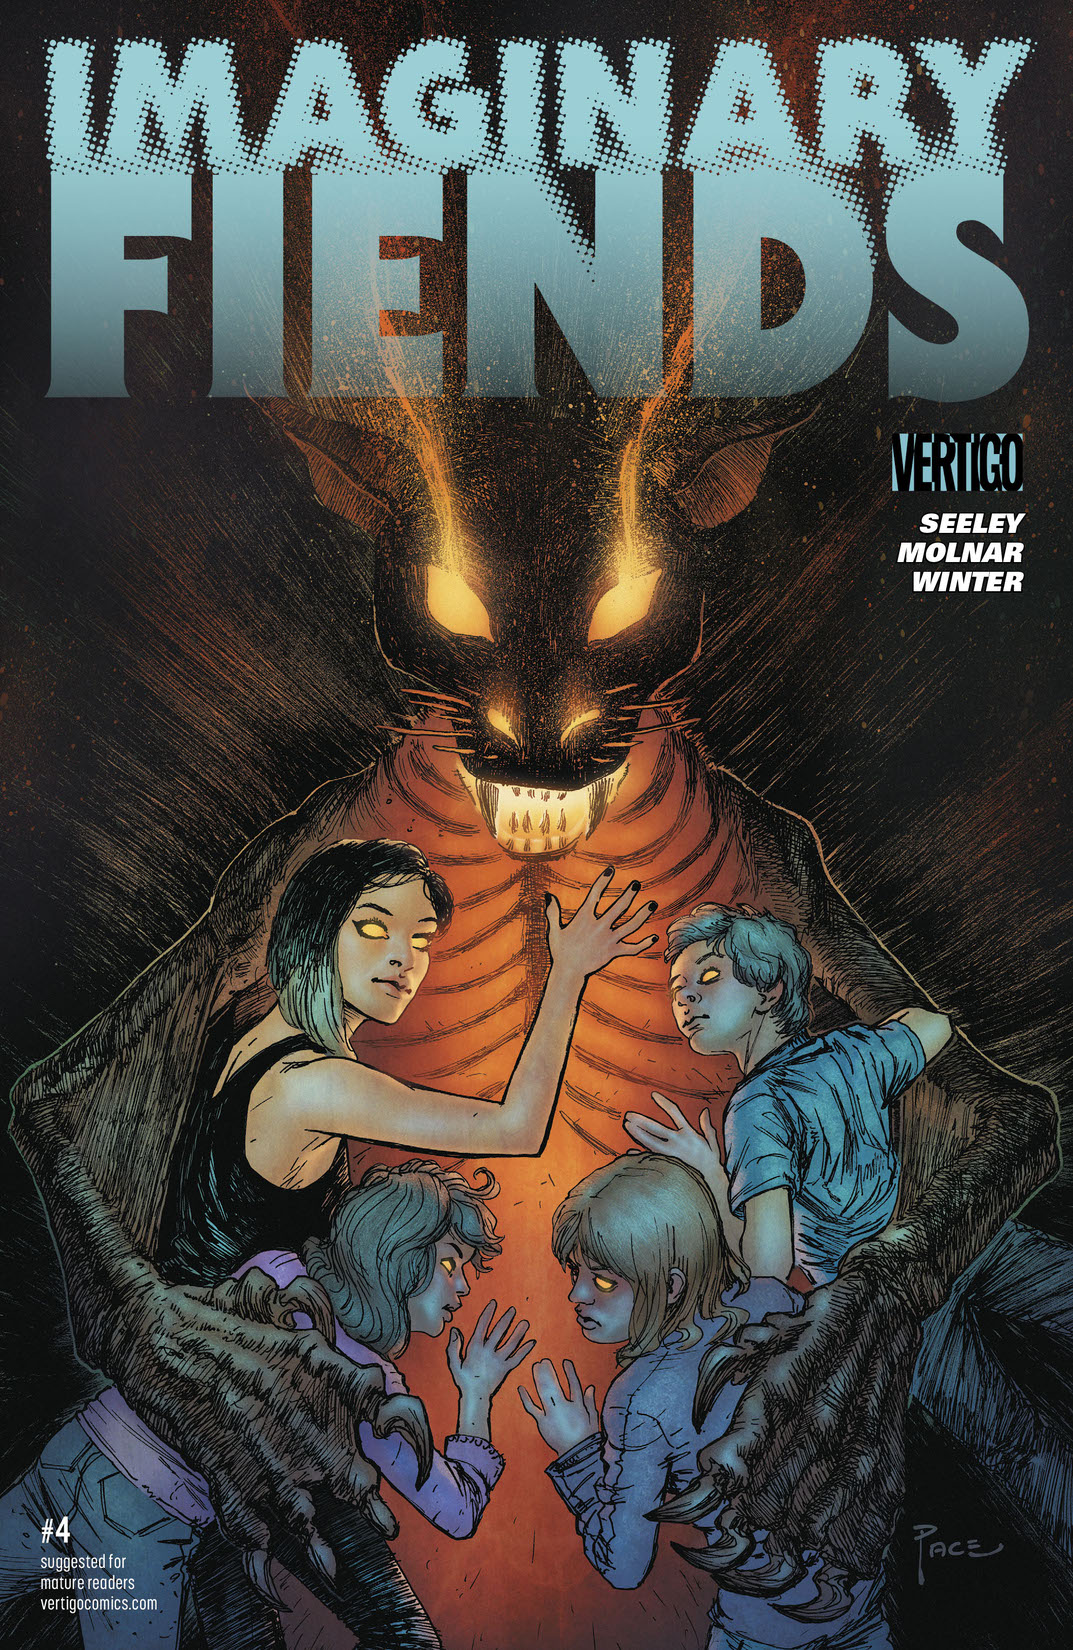 Imaginary Fiends #4 preview images